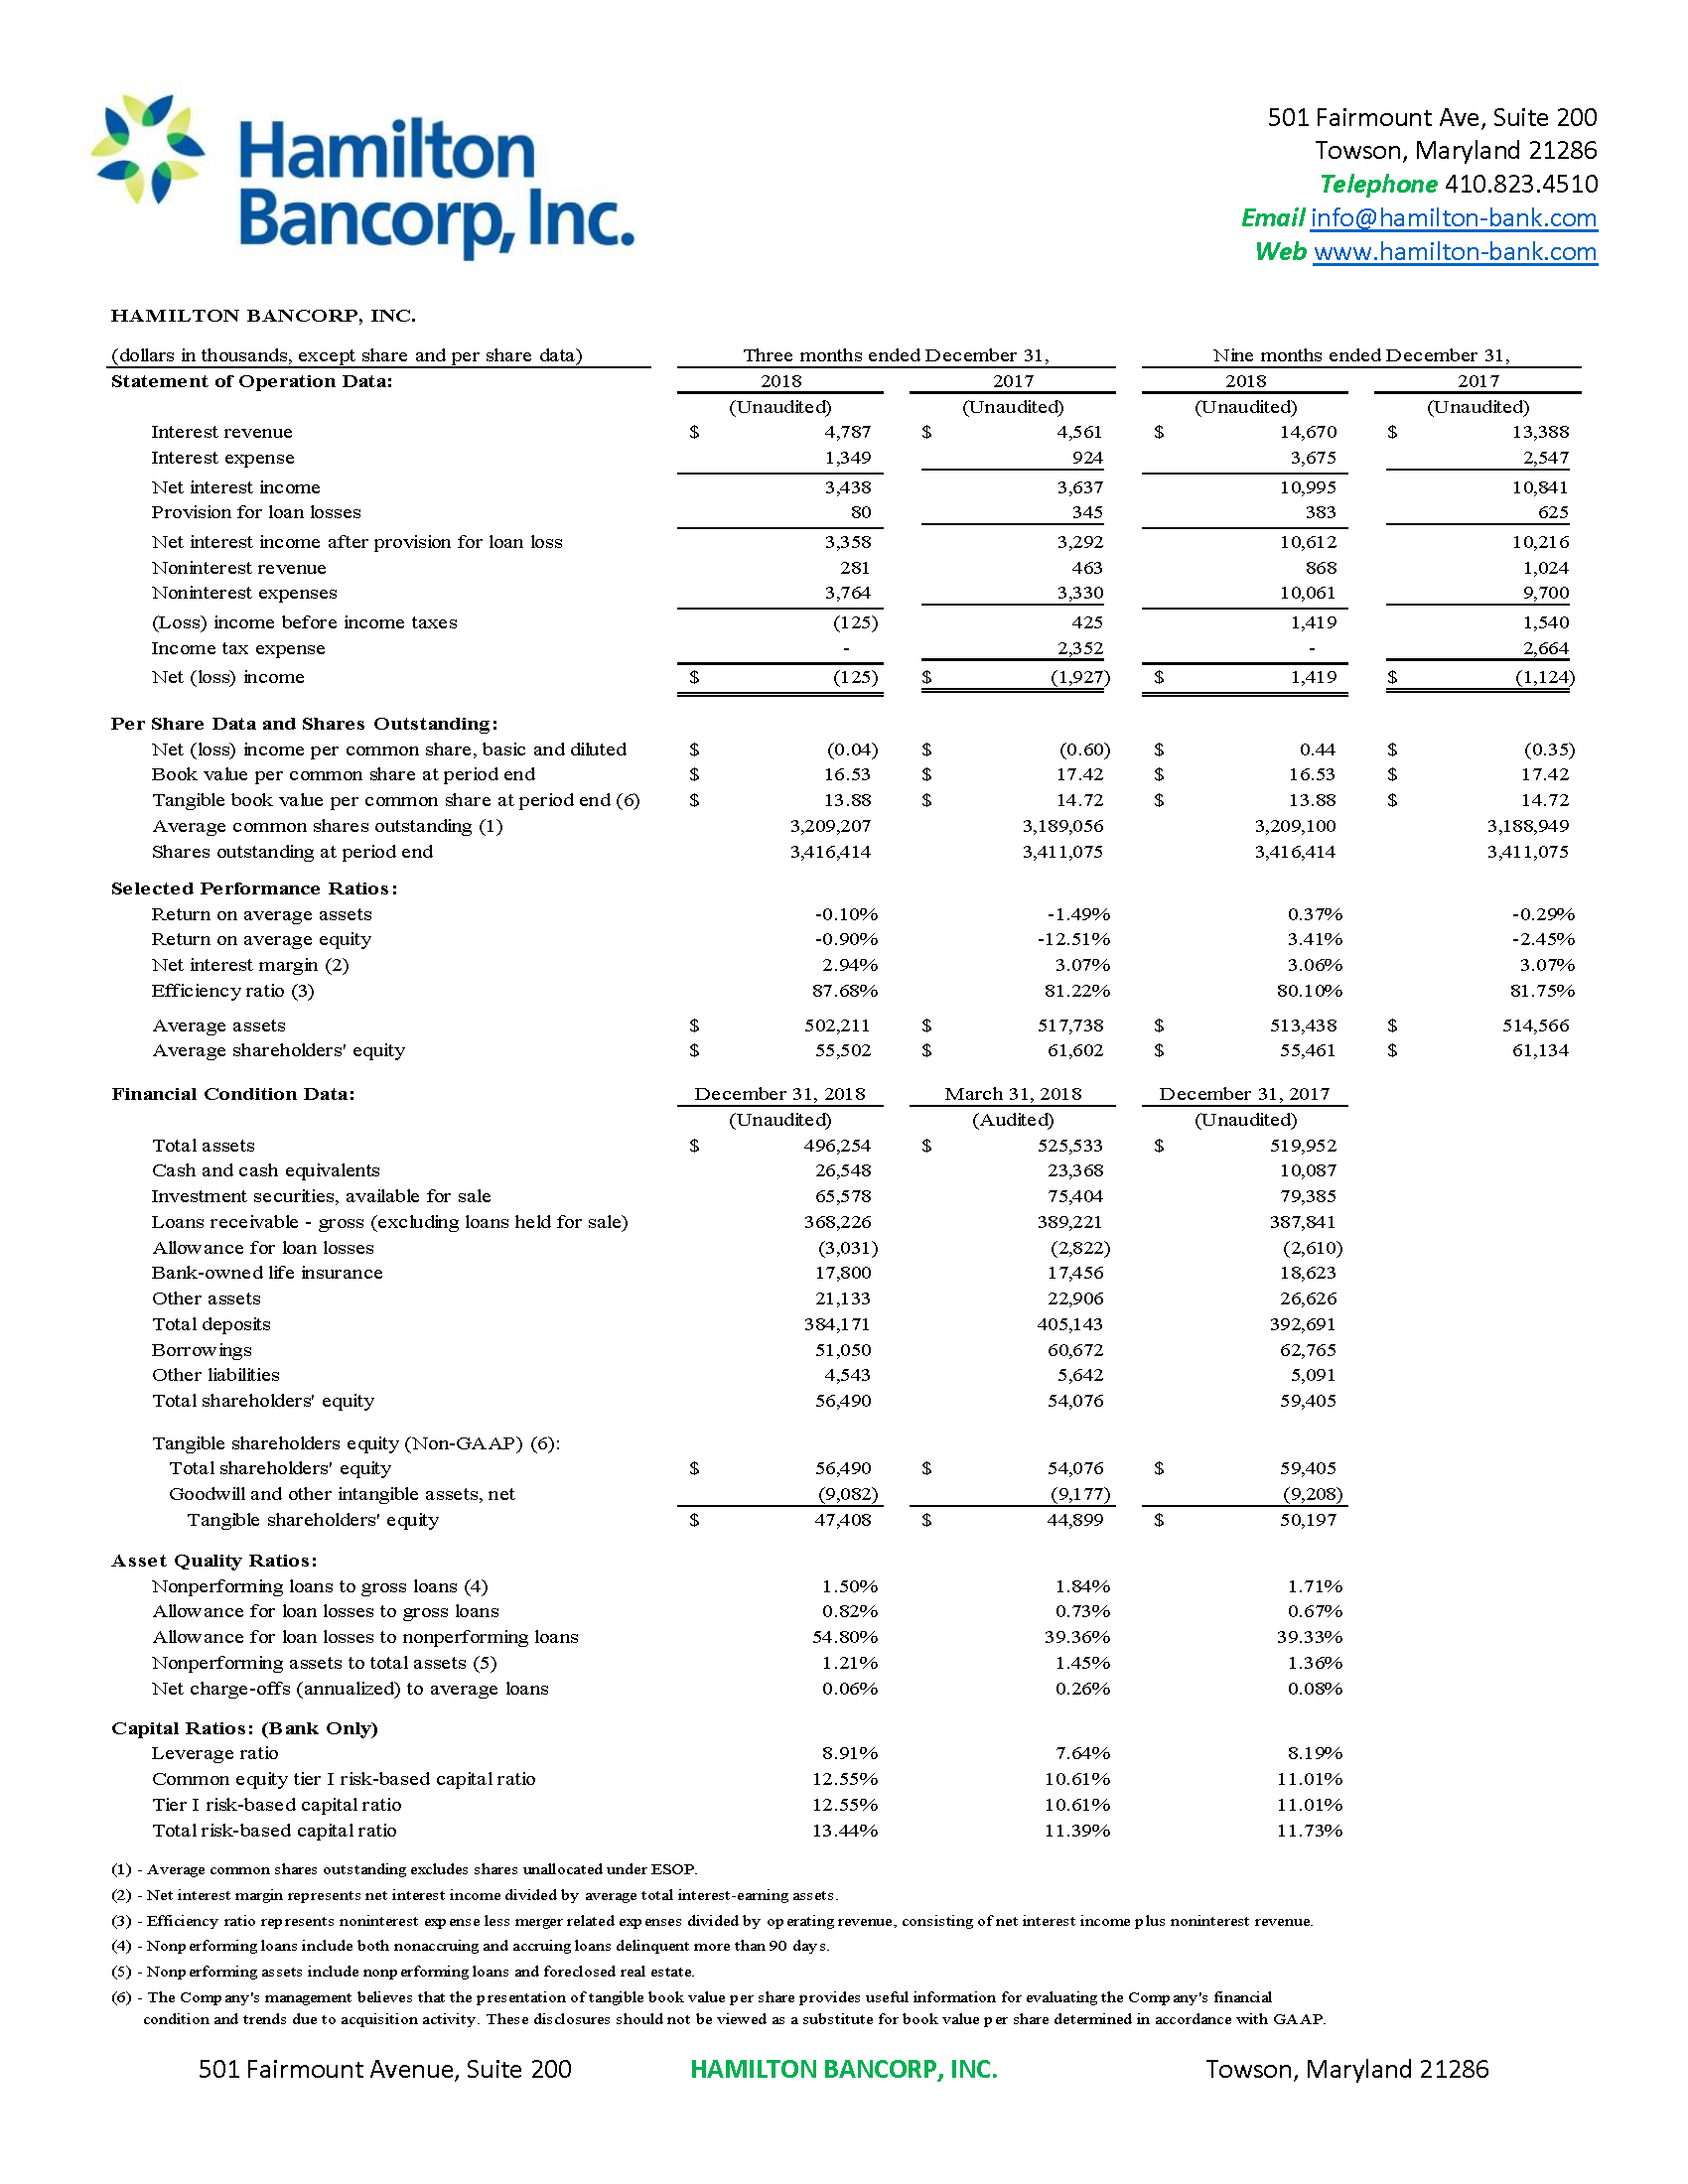 Hamilton Bancorp Q3 FY19 Earnings Release Financial Table